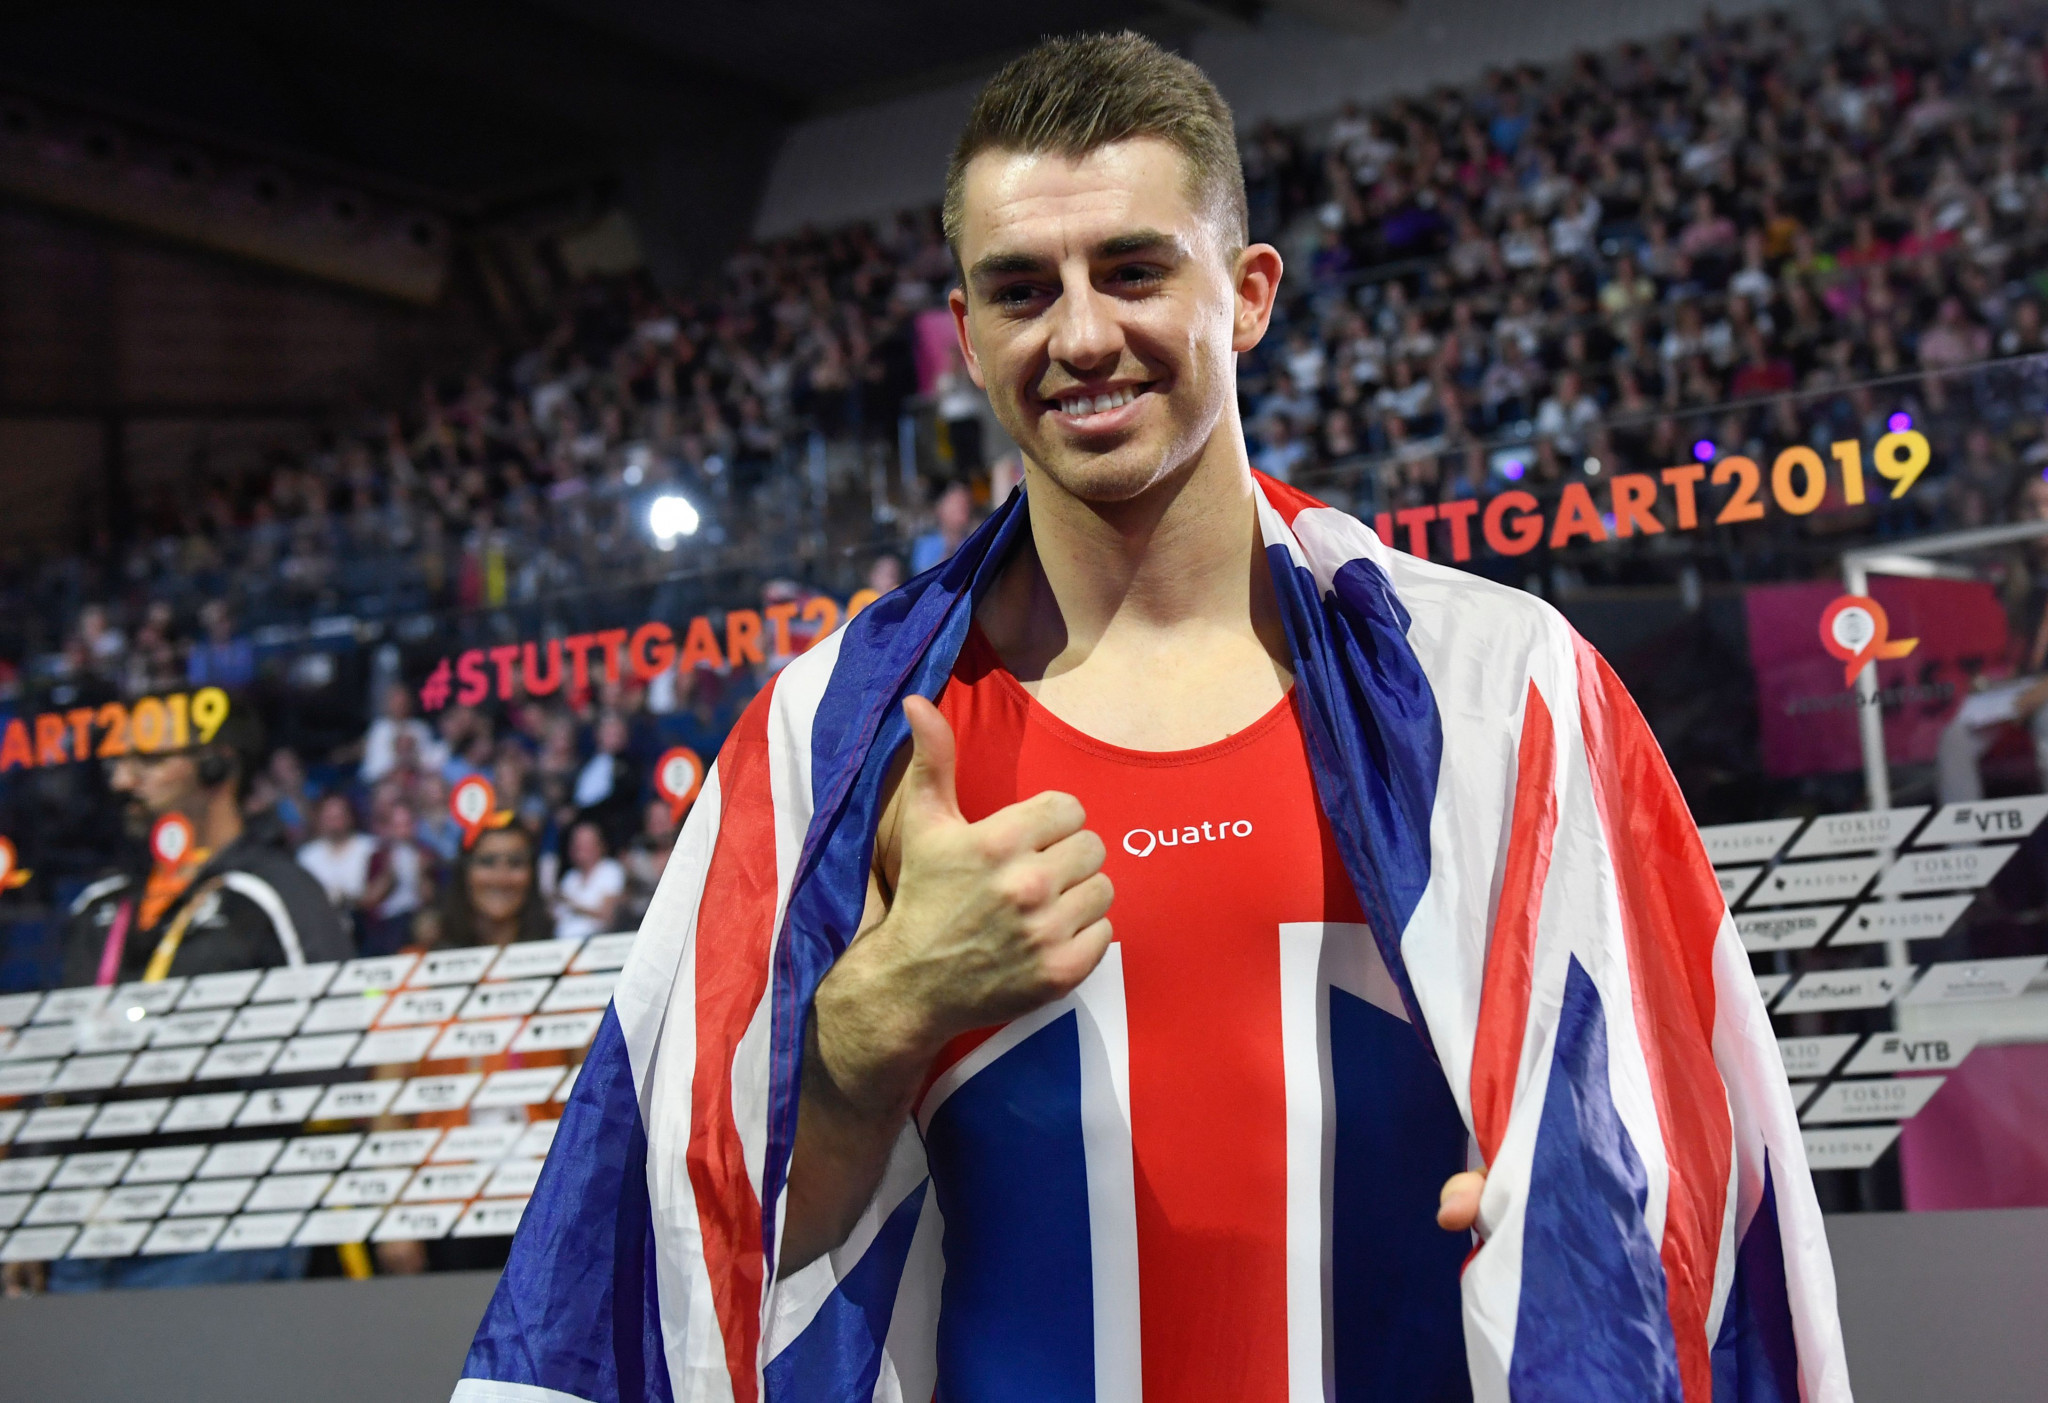 It was yet another special night for Britain's Max Whitlock ©Getty Images